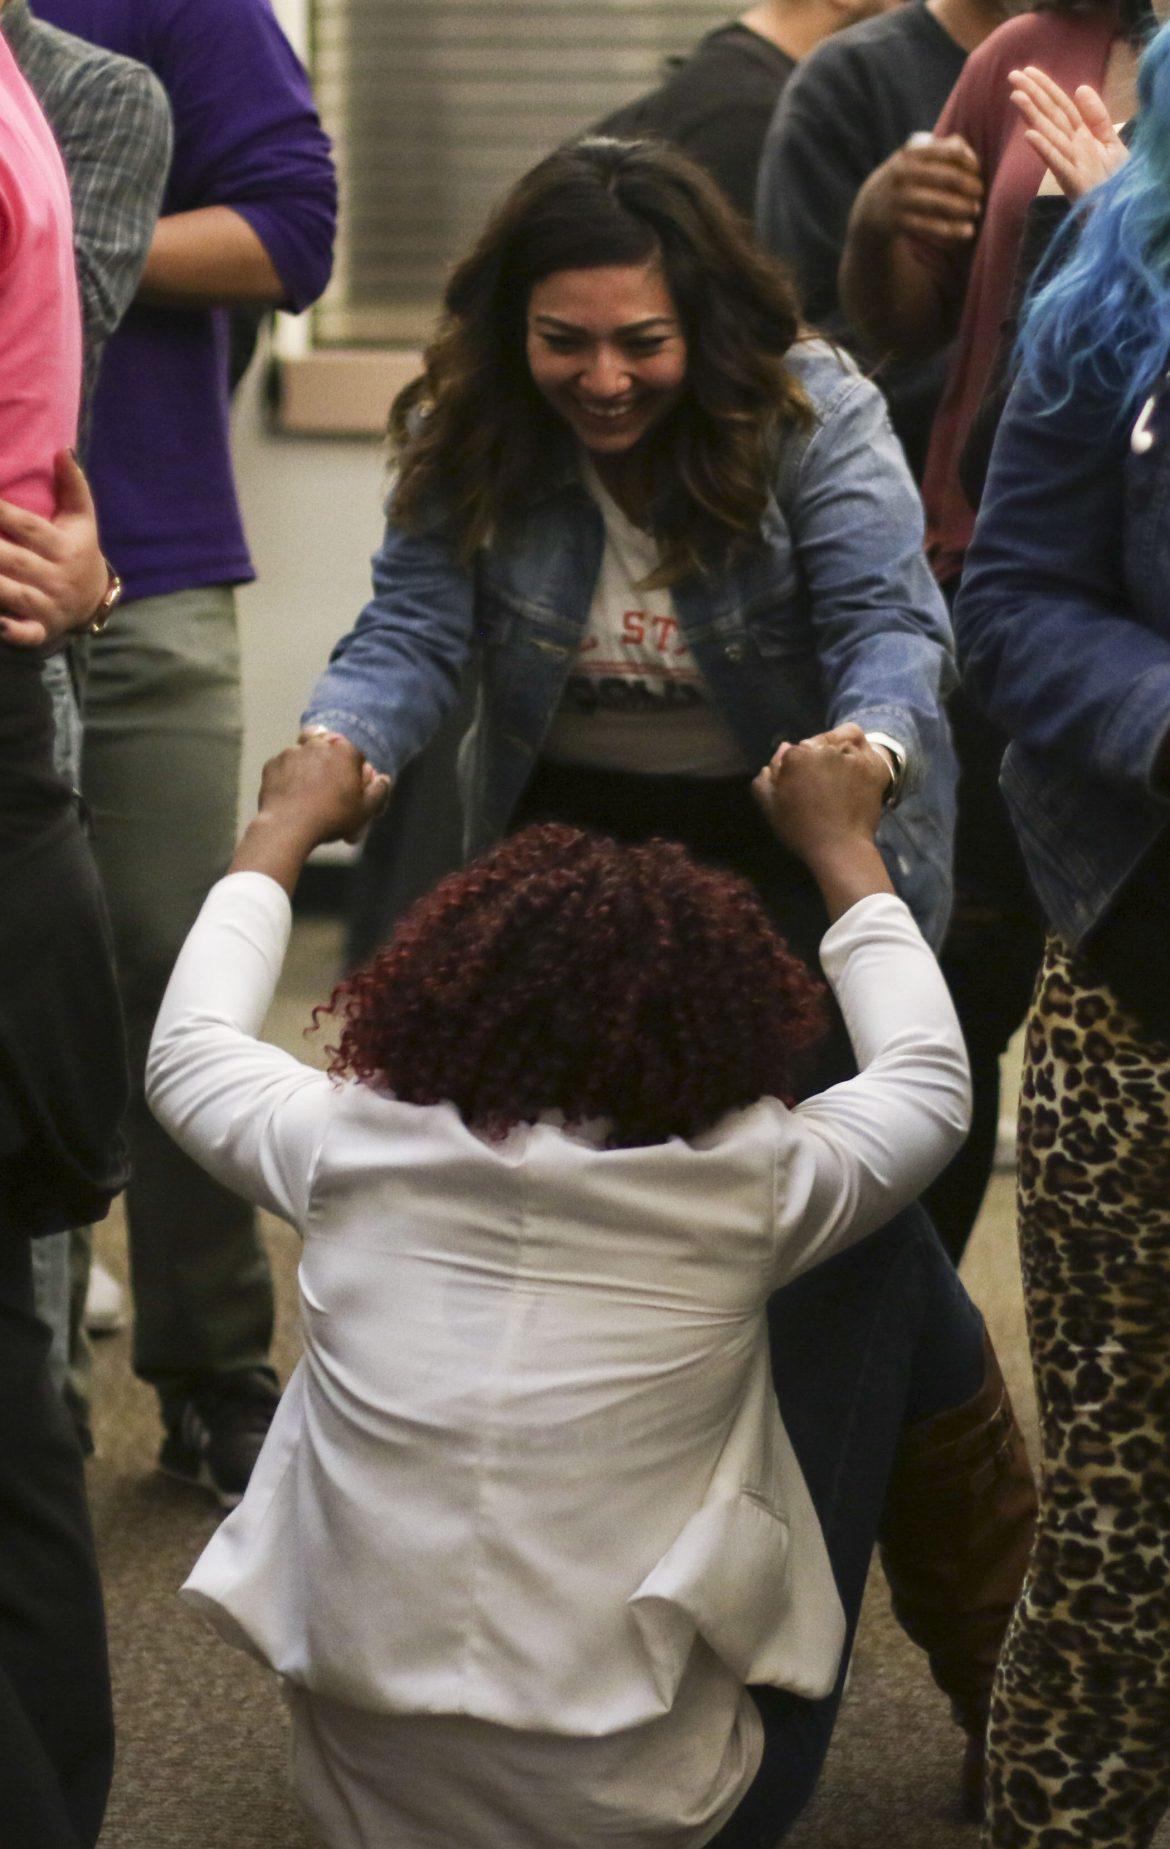 one woman dressed in blue denim jacket happily helps up a woman in white suit